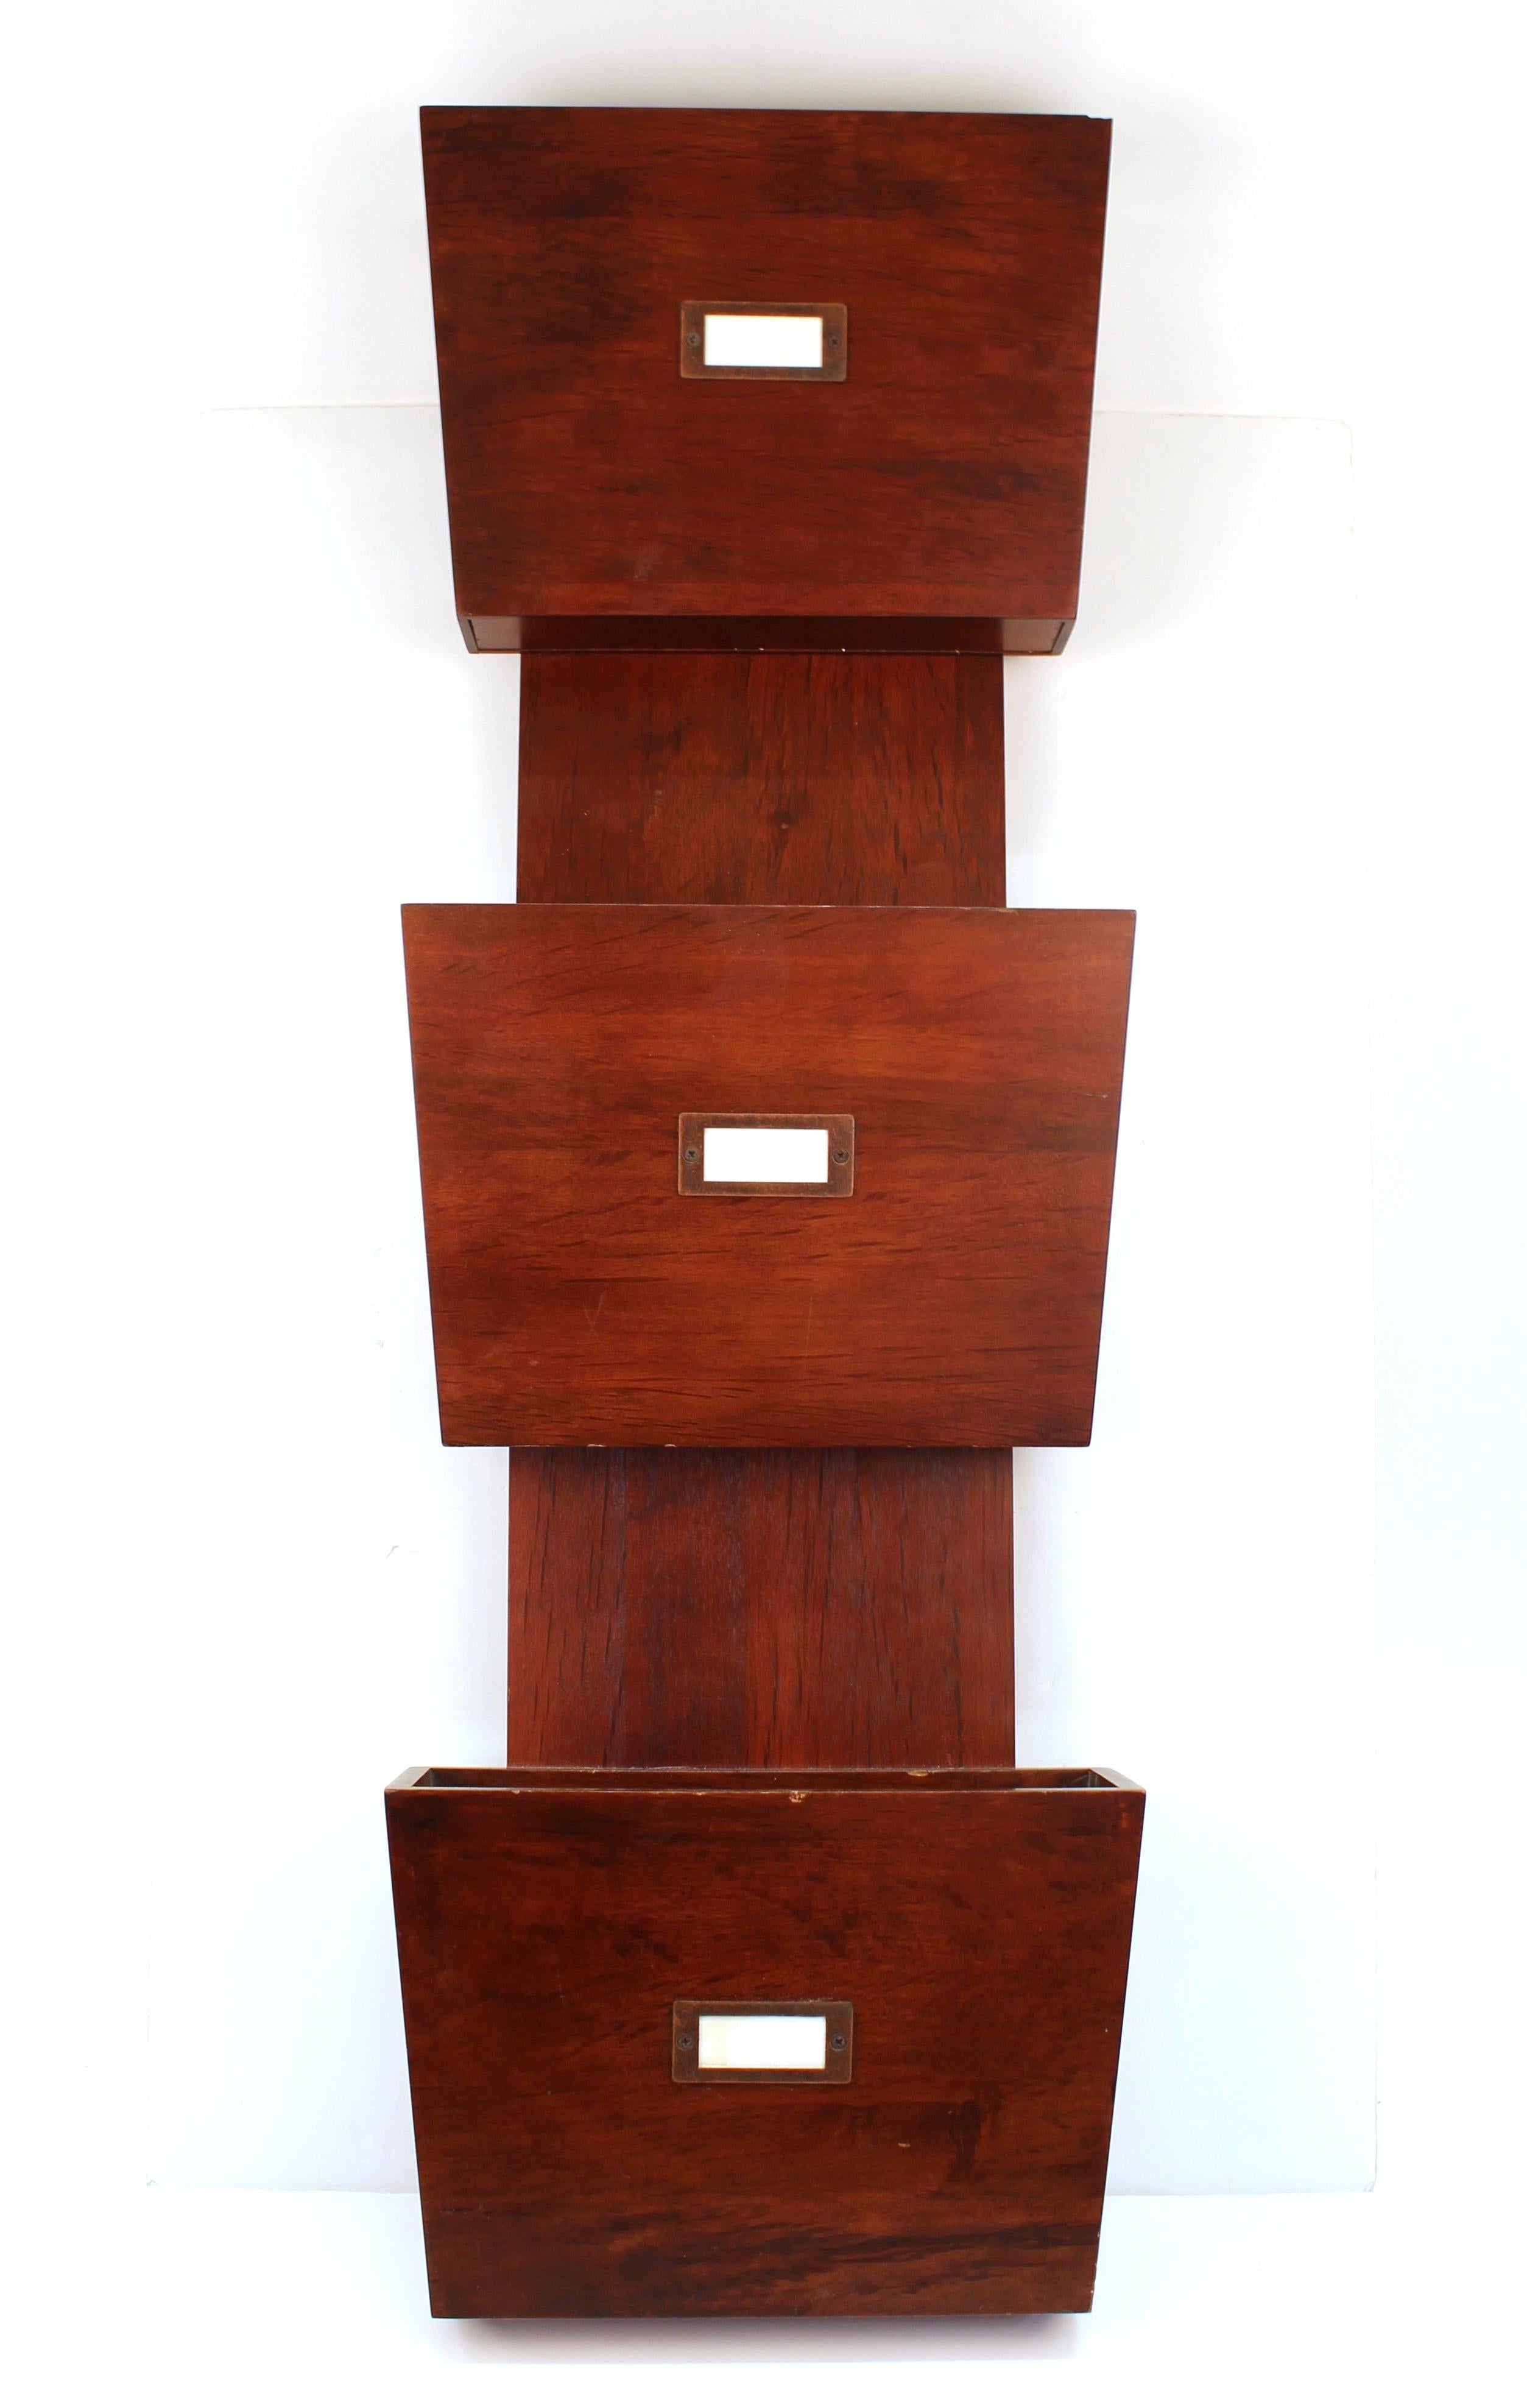 Mid-Century Modern style wall-mounted document holder in wood with three separate sections for documents, each one with a tag holder. In great vintage condition with some minor chips to the edges of the document containers.